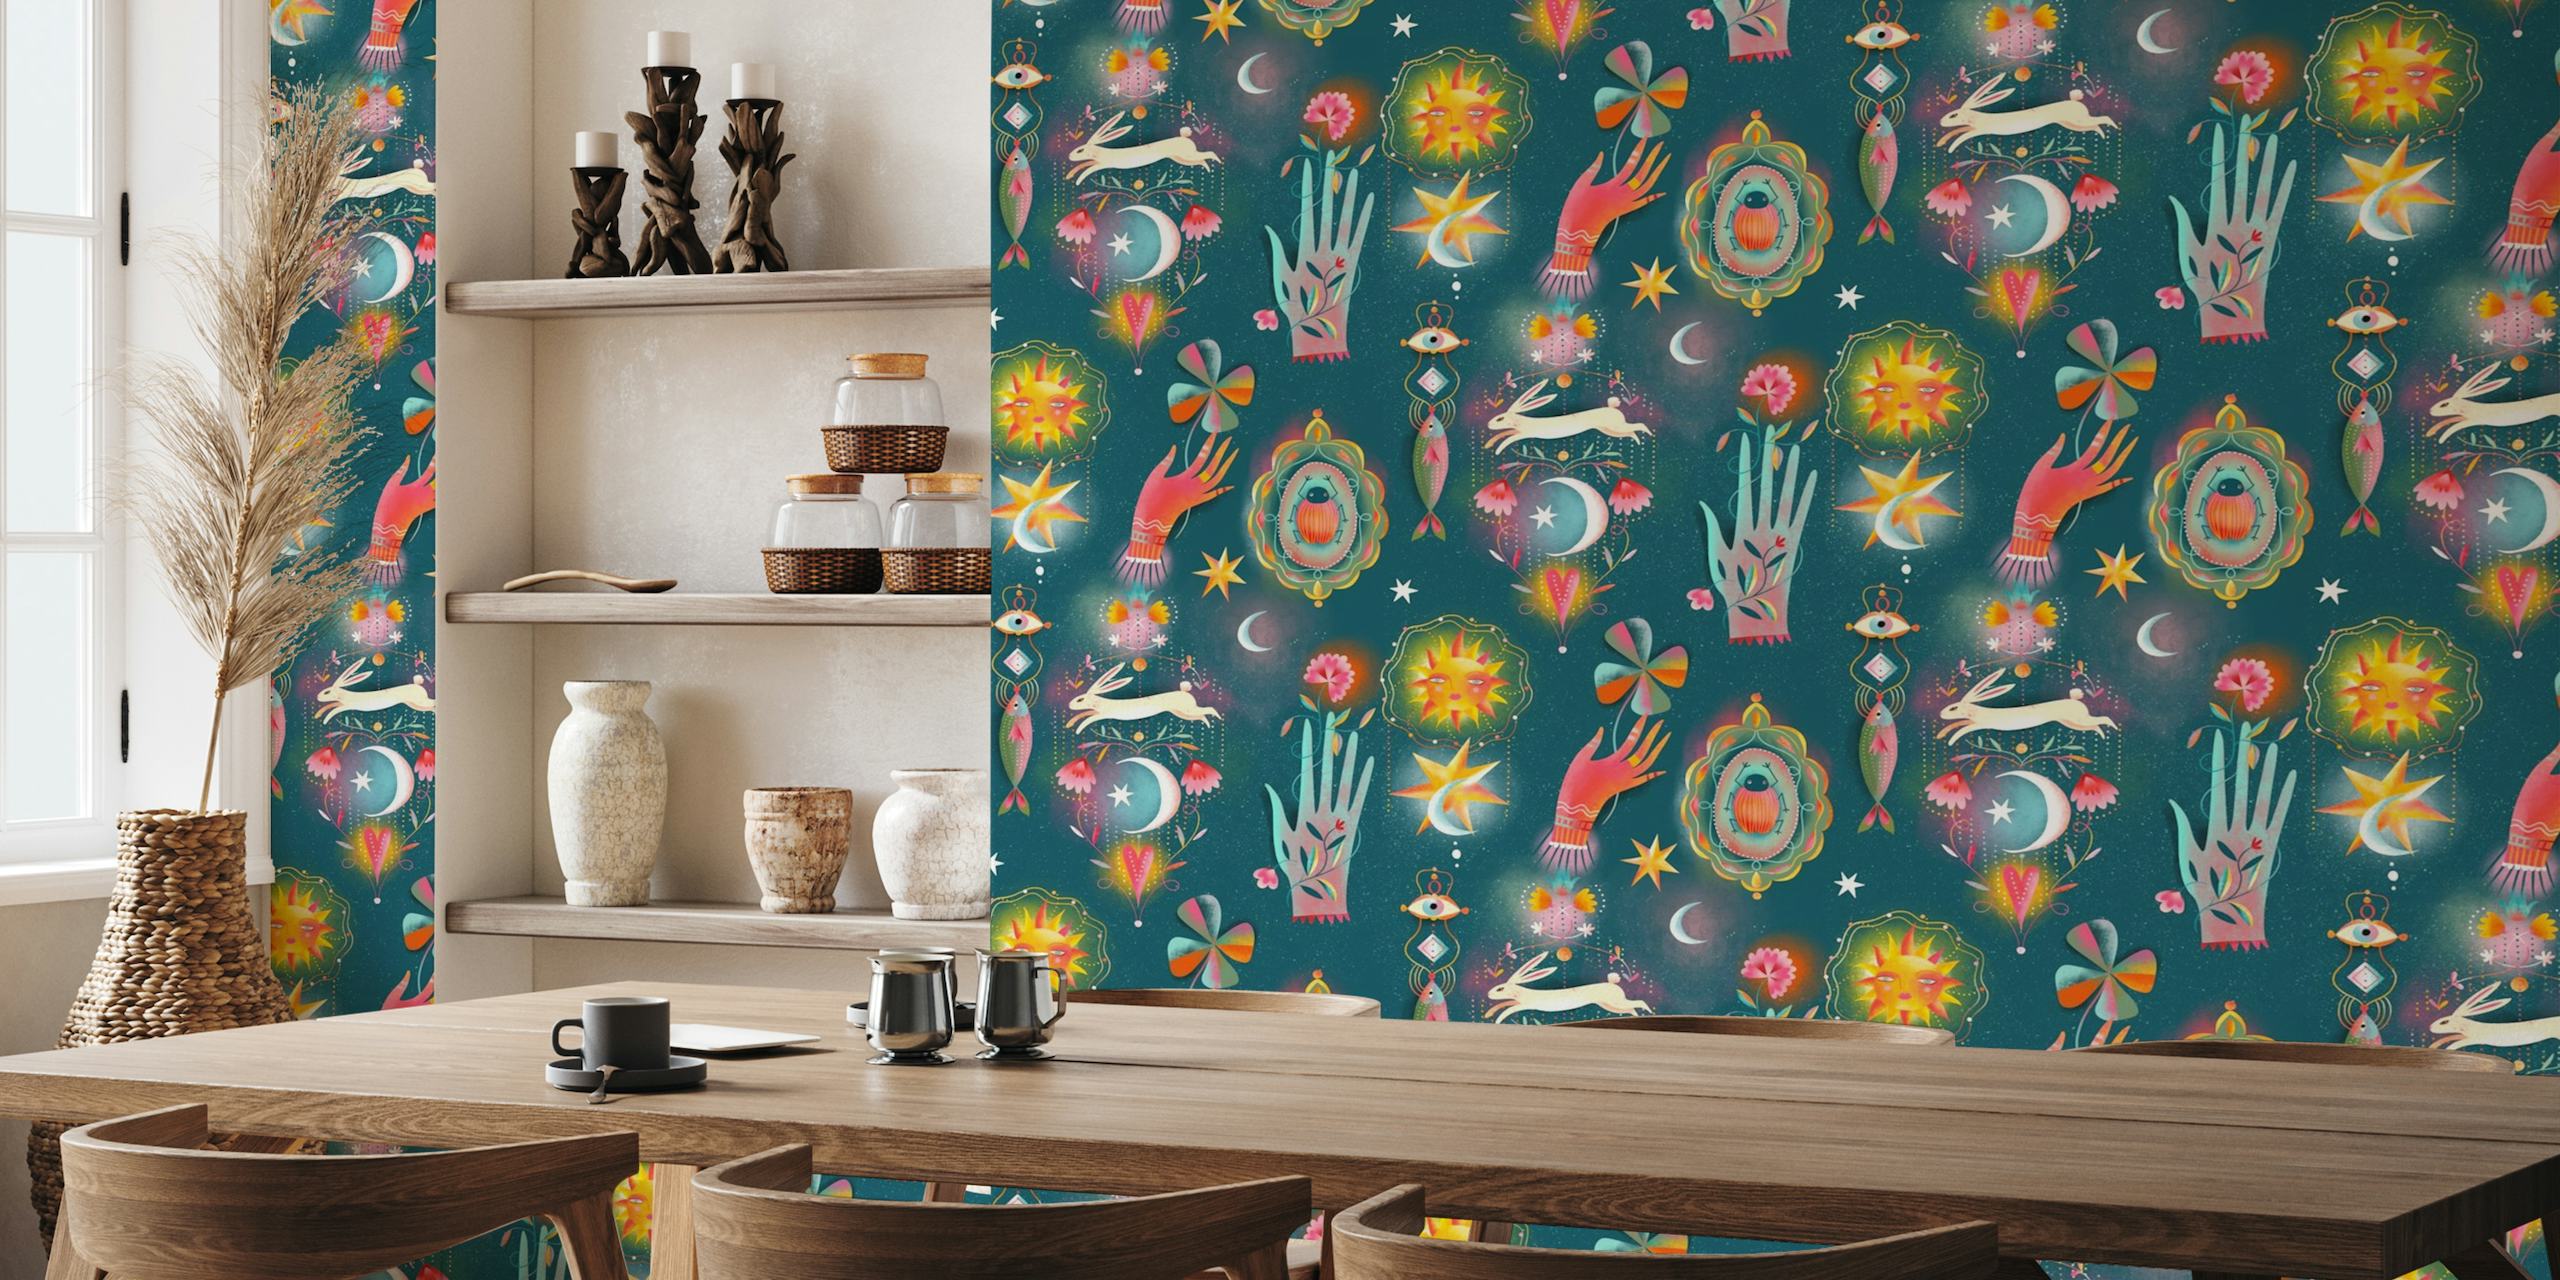 Enigmatic esoteric symbols on 'Magical Talisman' wall mural with celestial and botanical motifs.